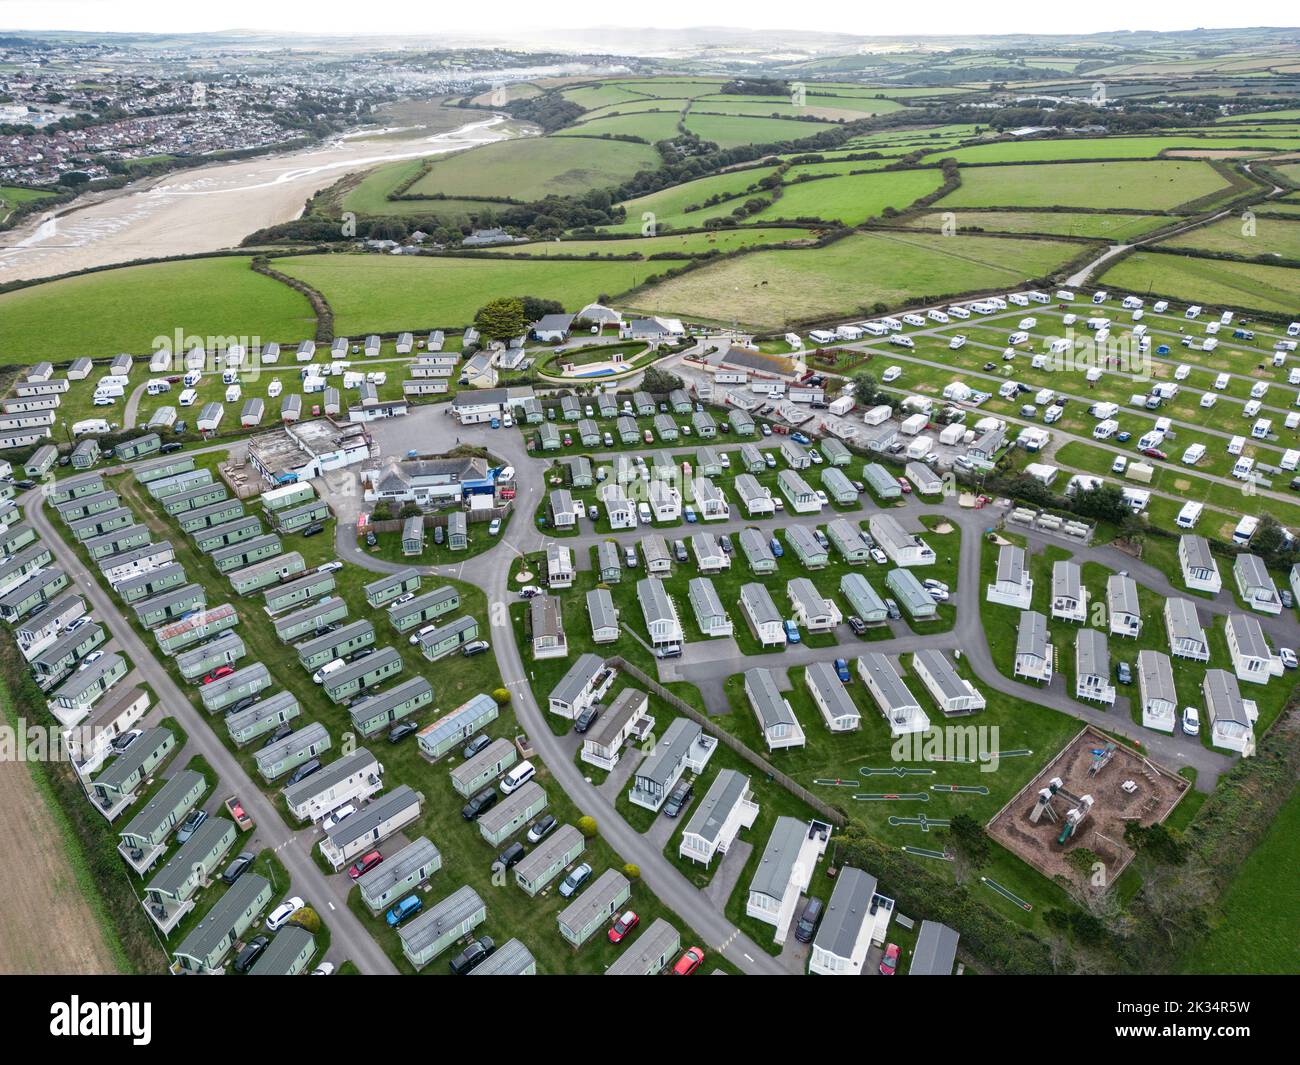 A static Caravan park with its lines of caravans on the north Cornwall coast at Crantock, ENgland.  Caravans are popular holiday accommodation. Stock Photo